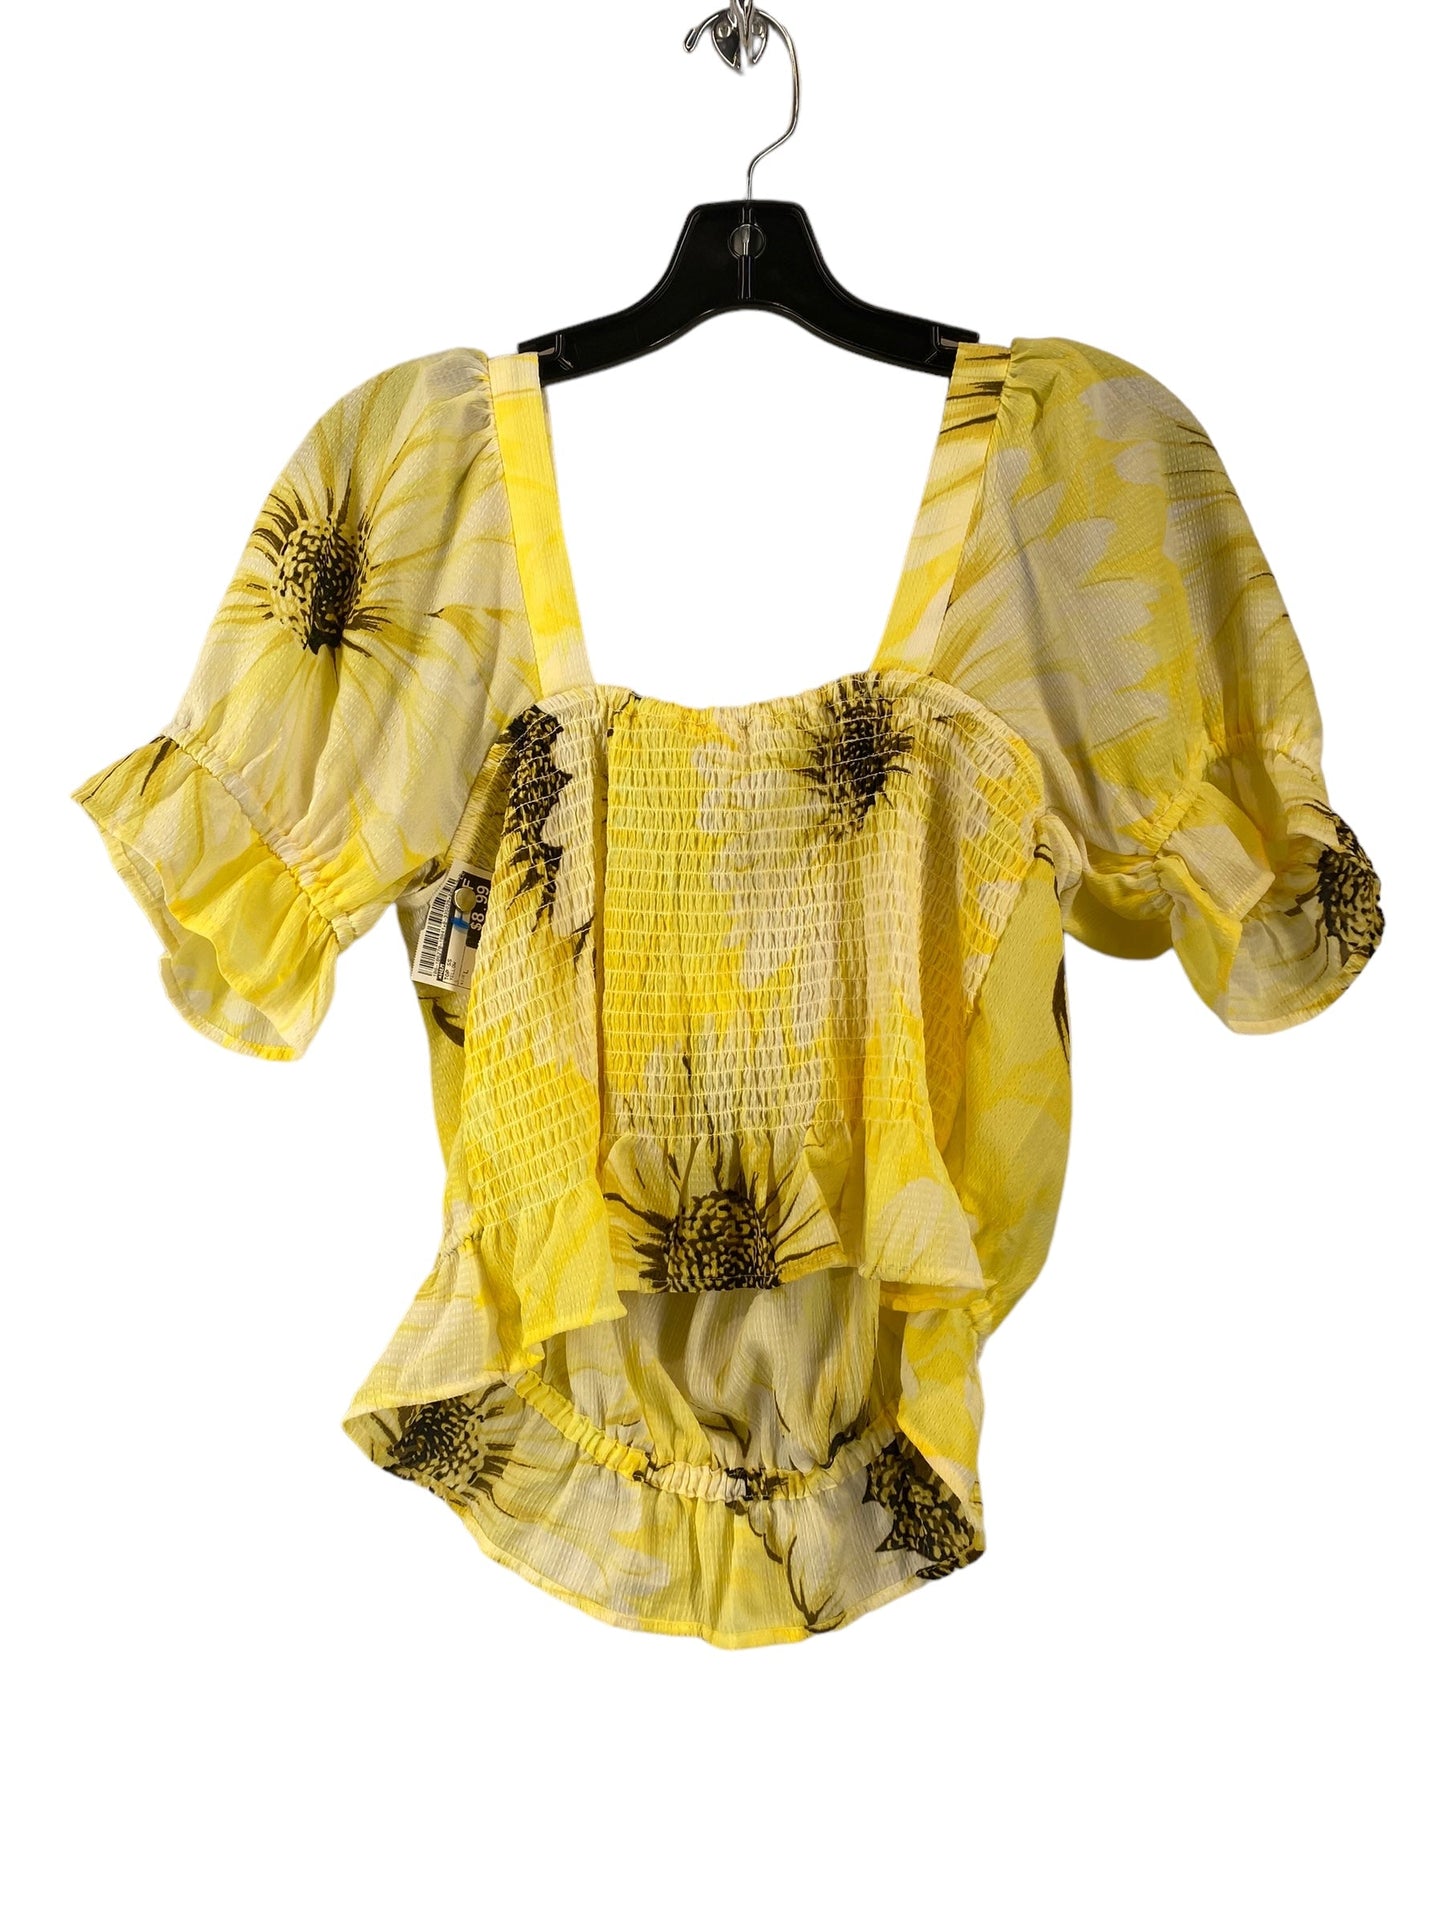 Yellow Top Short Sleeve H&m, Size L